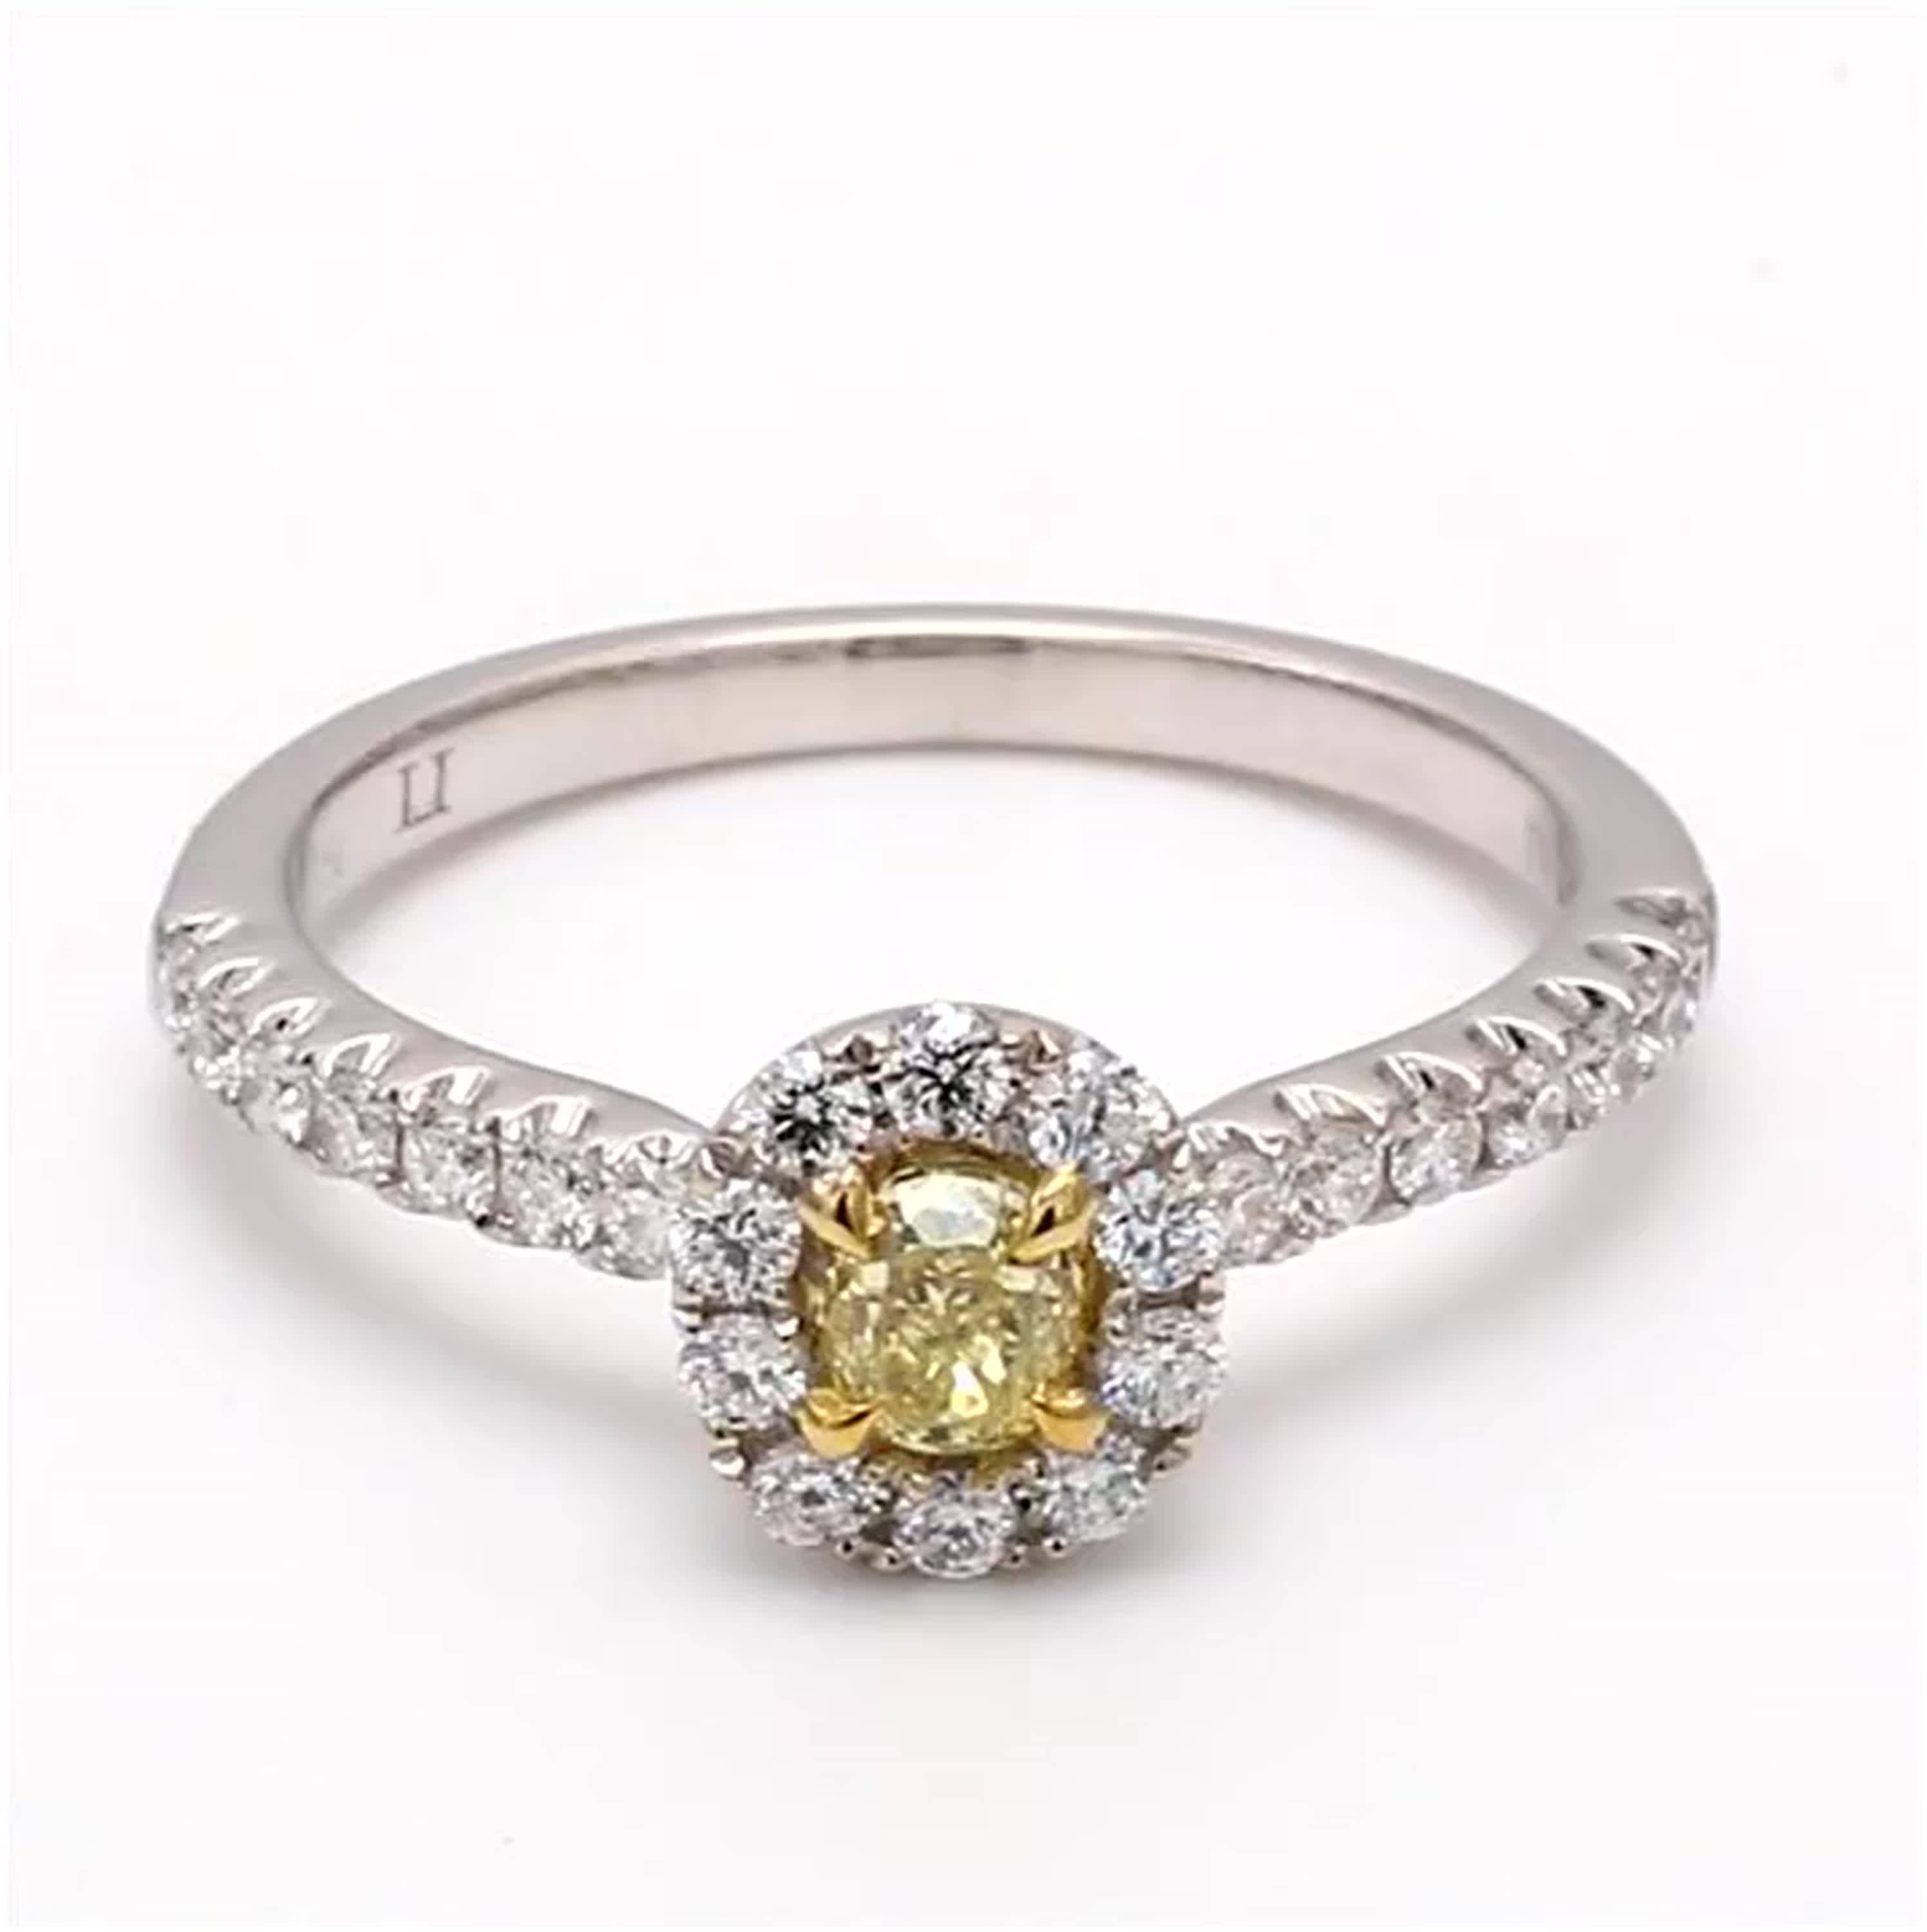 RareGemWorld's classic diamond ring. Mounted in a beautiful 18K Yellow and White Gold setting with a natural round cut yellow diamond. The yellow diamond is surrounded by round natural white diamond melee. This ring is guaranteed to impress and